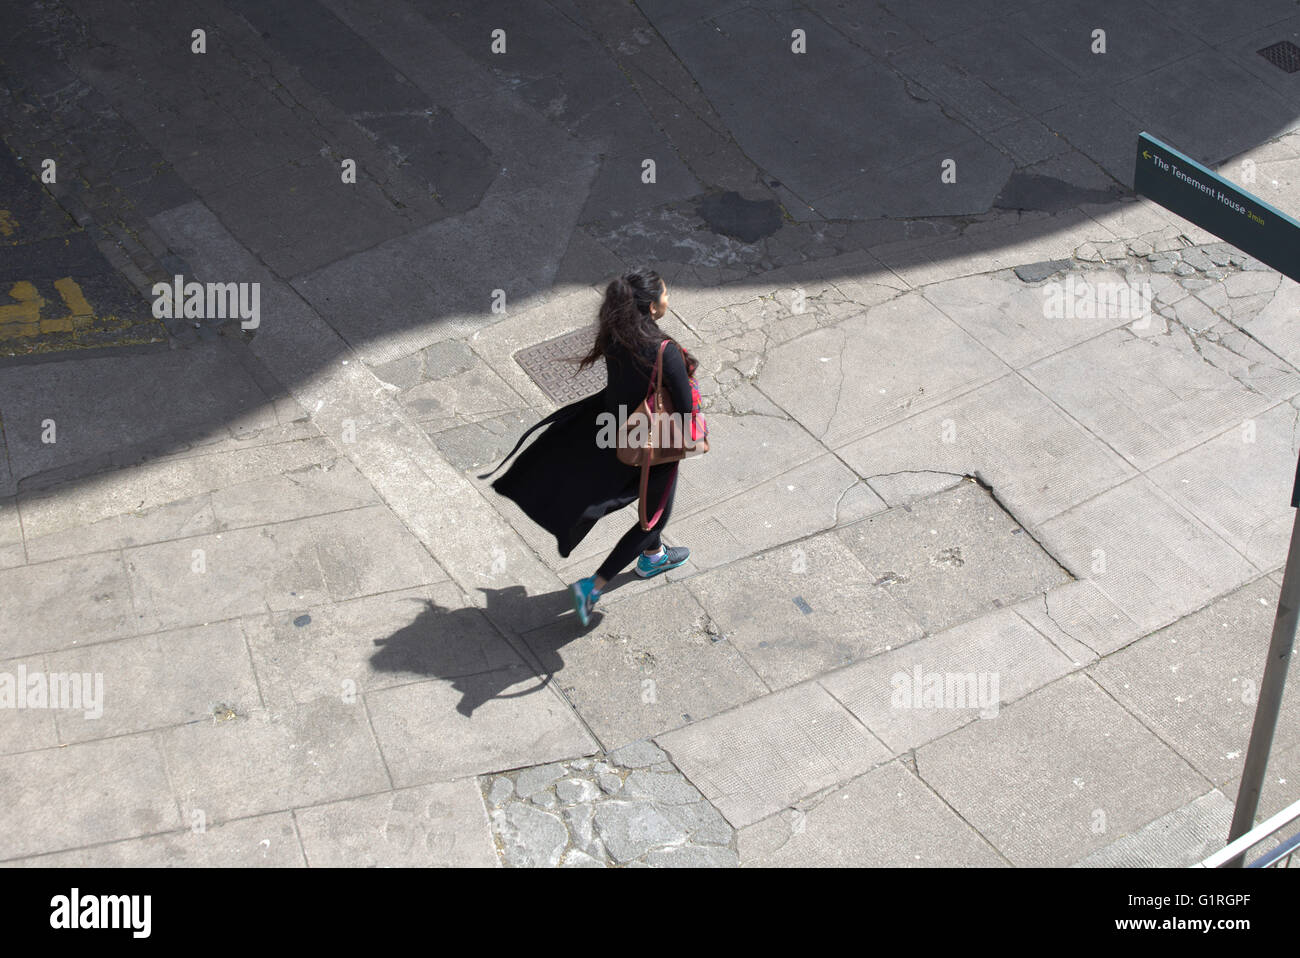 Young trendy girl with flowing dress and shadow viewed from above,Glasgow, Scotland, UK Stock Photo